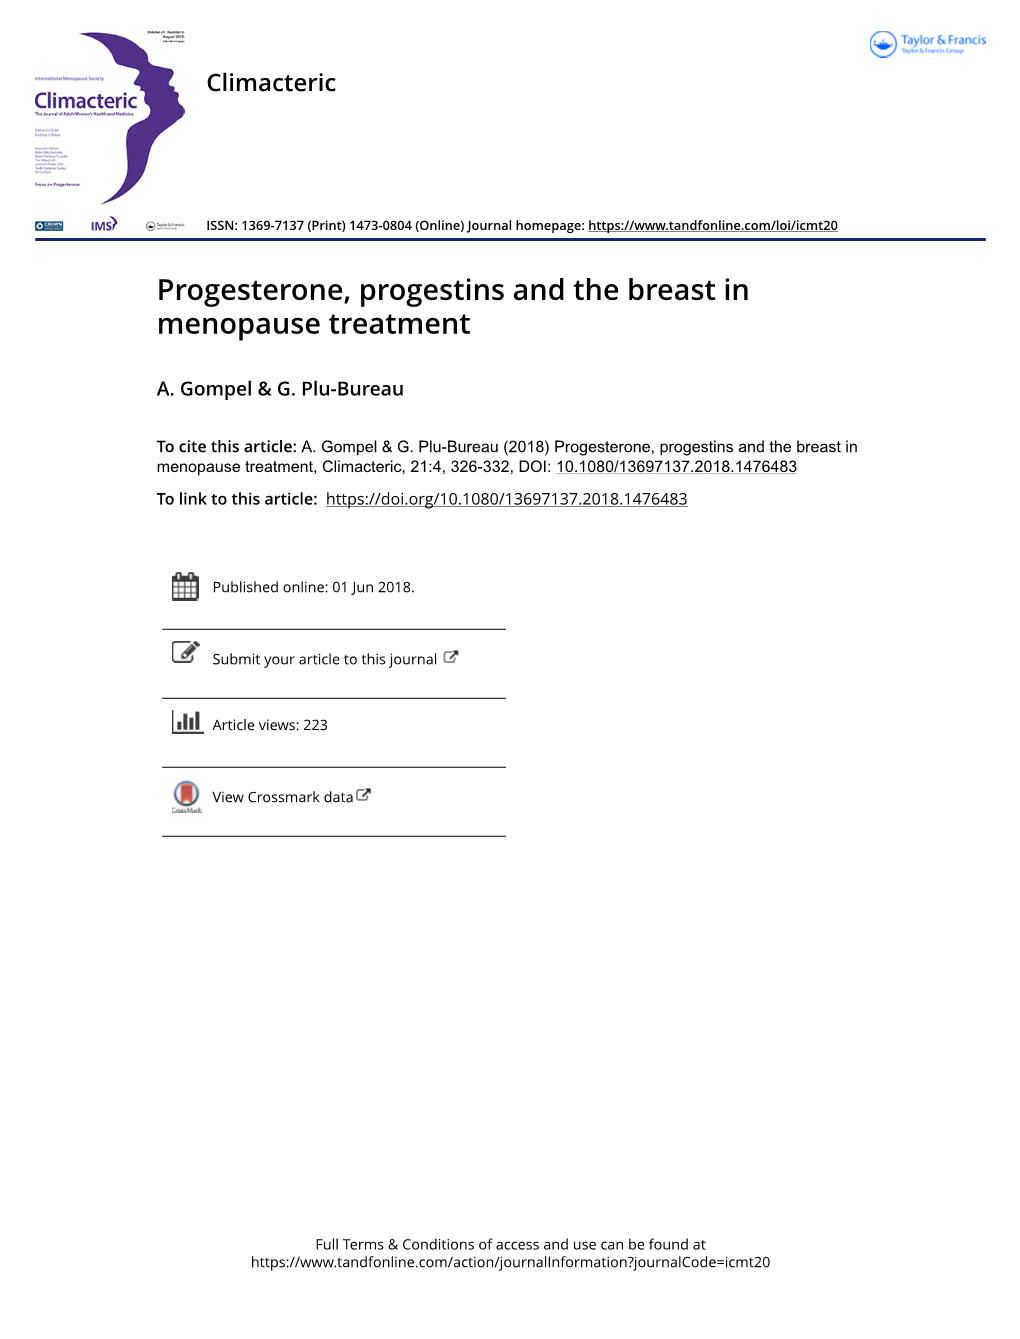 Progesterone, Progestins and the Breast in Menopause Treatment